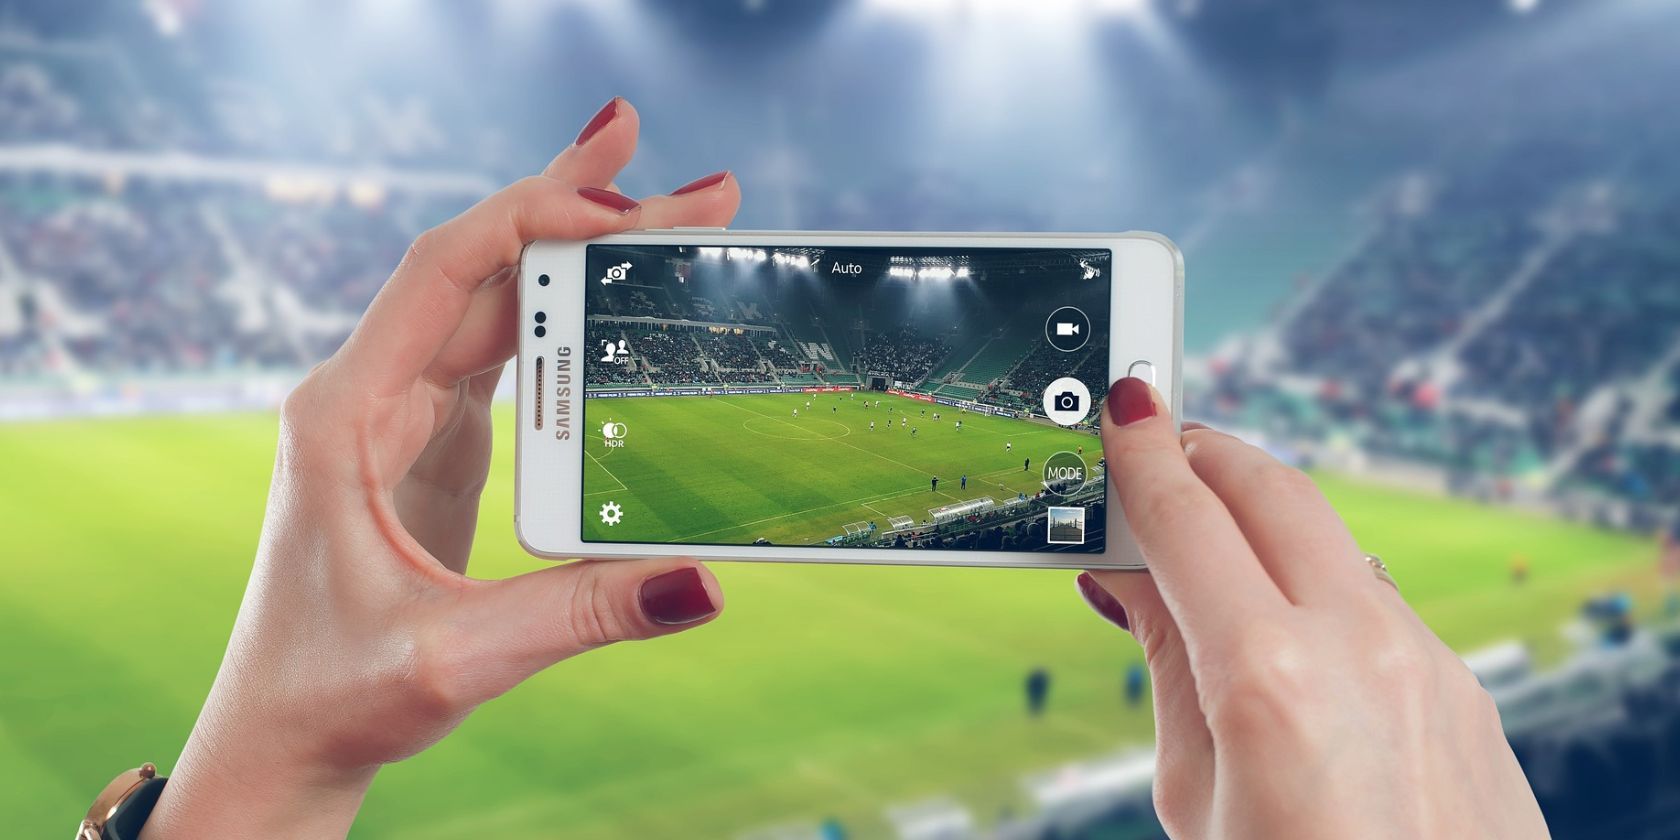 samsung phone being used to take photo of football game